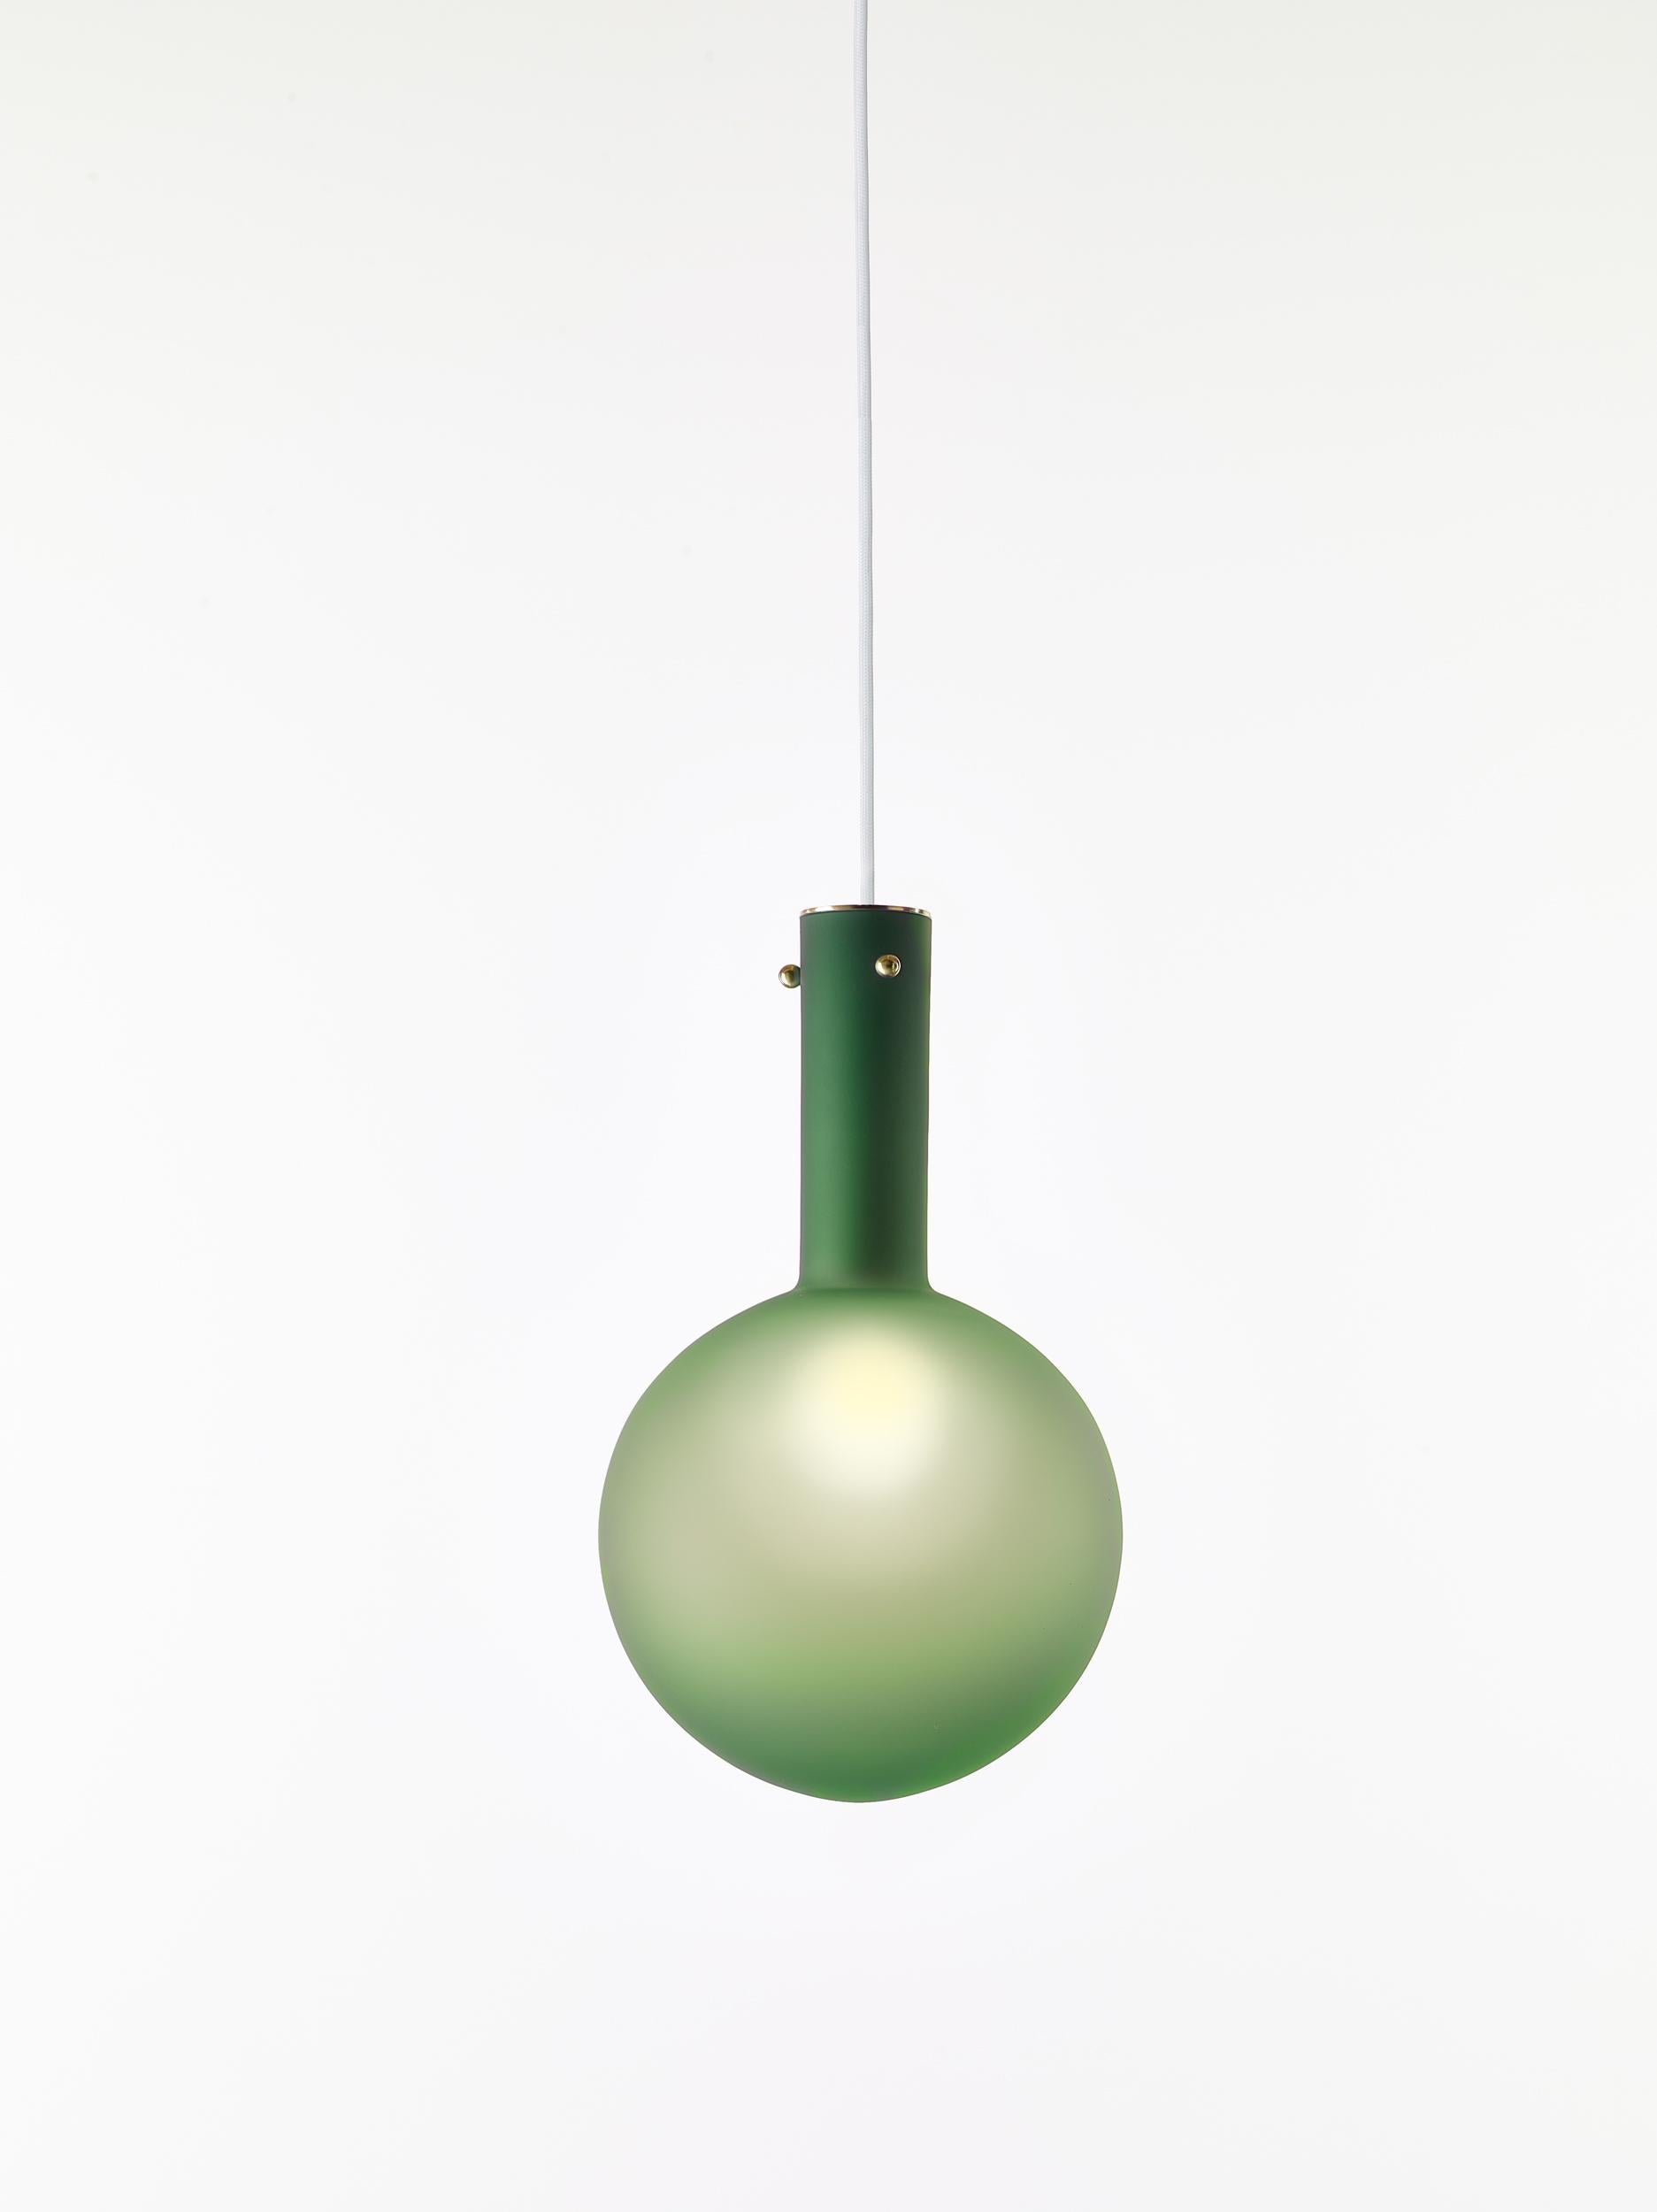 Set of 2 Matte Green Sphaerae pendant lights by Dechem Studio
Dimensions: D 20 x H 180 cm
Materials: brass, metal, glass.
Also available: different finishes and colors available.

Only one homogenous piece of hand-blown glass creates the main